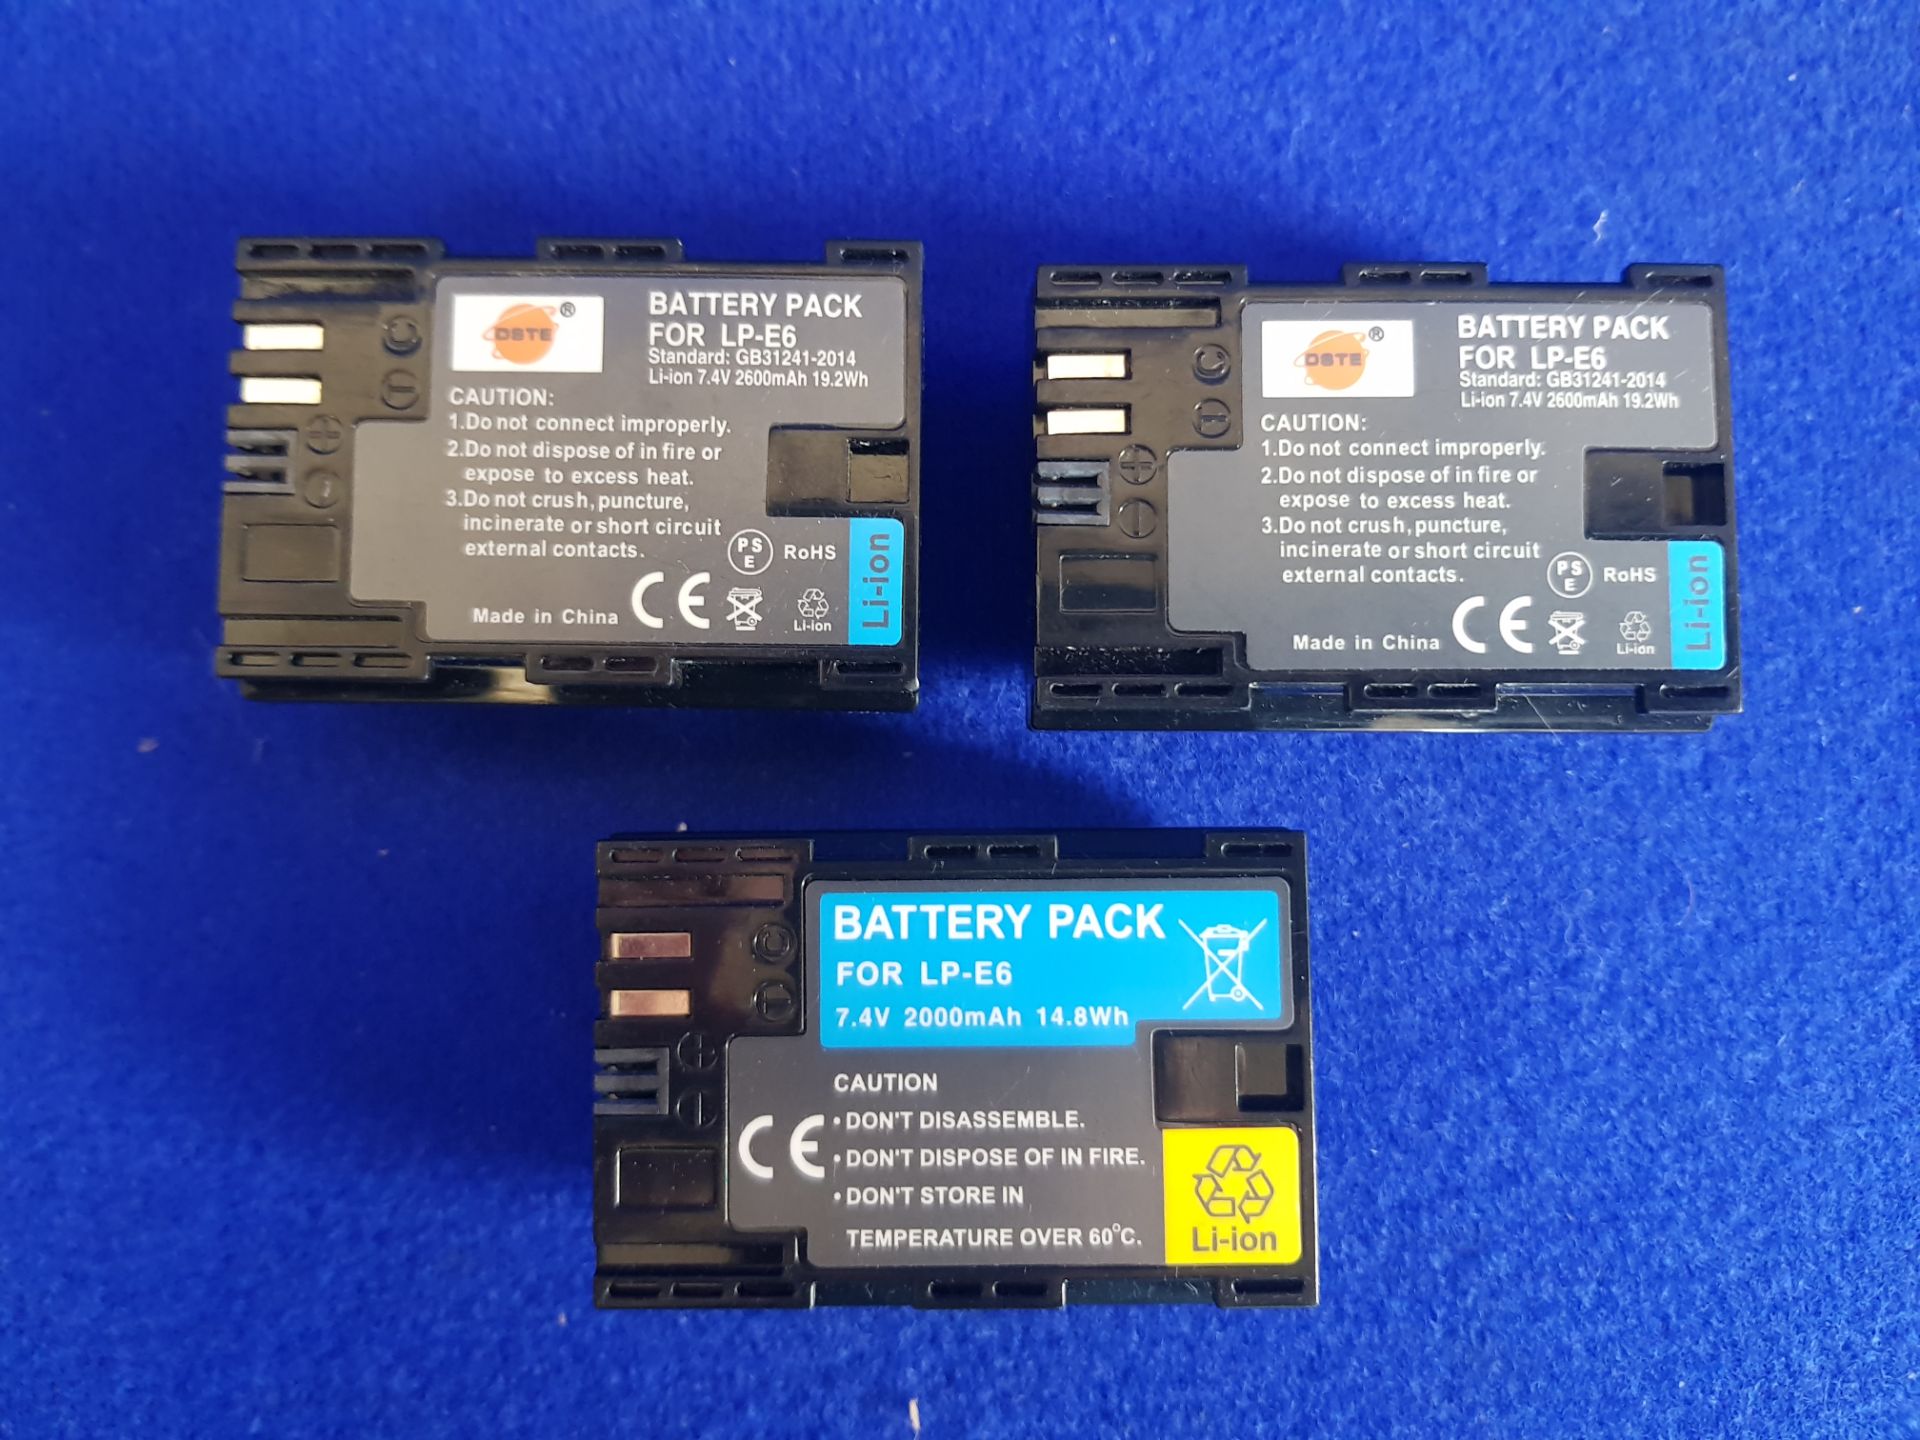 Camkix Batteries And Battery Chargers With Bag - Image 4 of 6